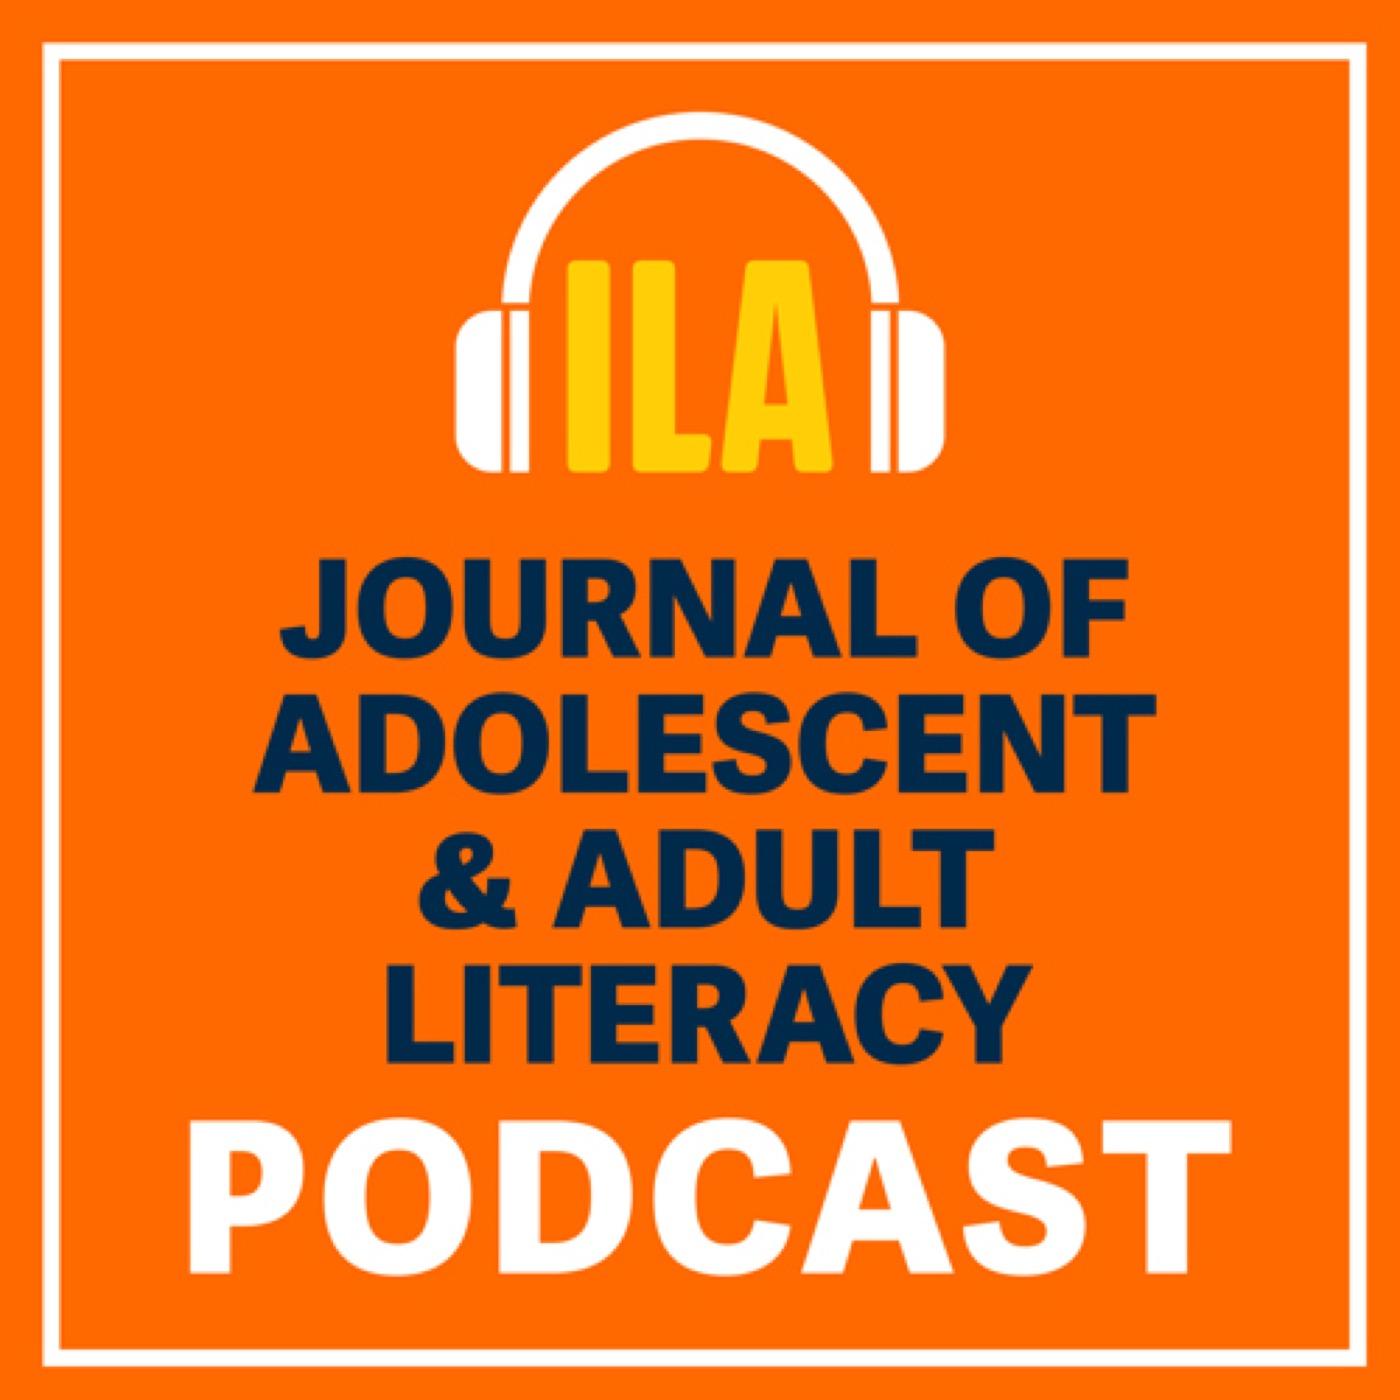 Journal of Adolescent & Adult Literacy Podcast